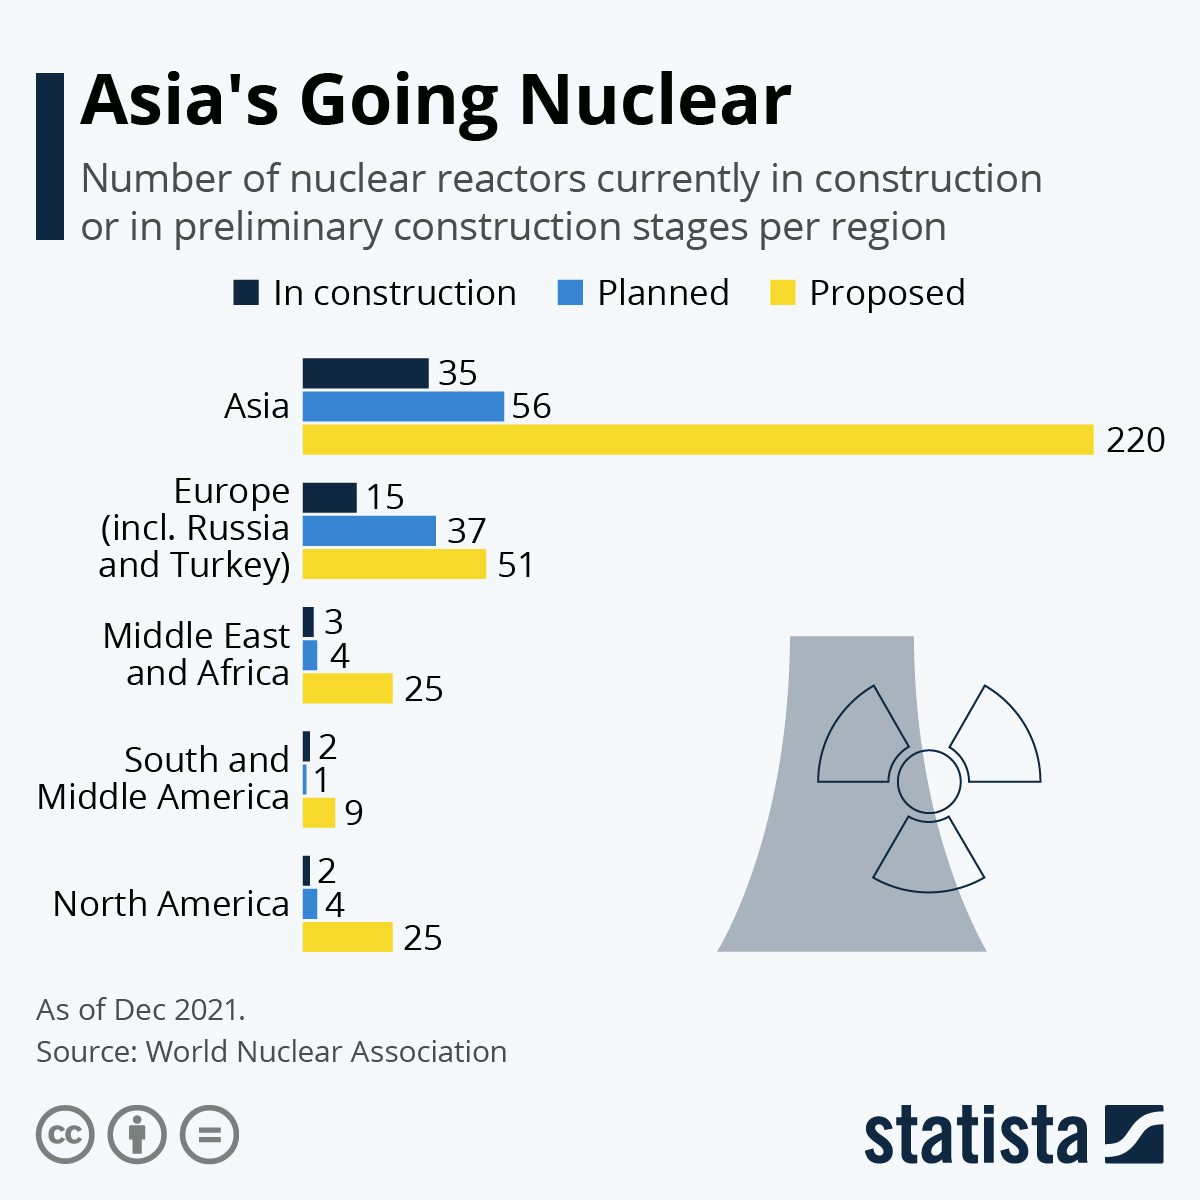 Asia's Going Nuclear